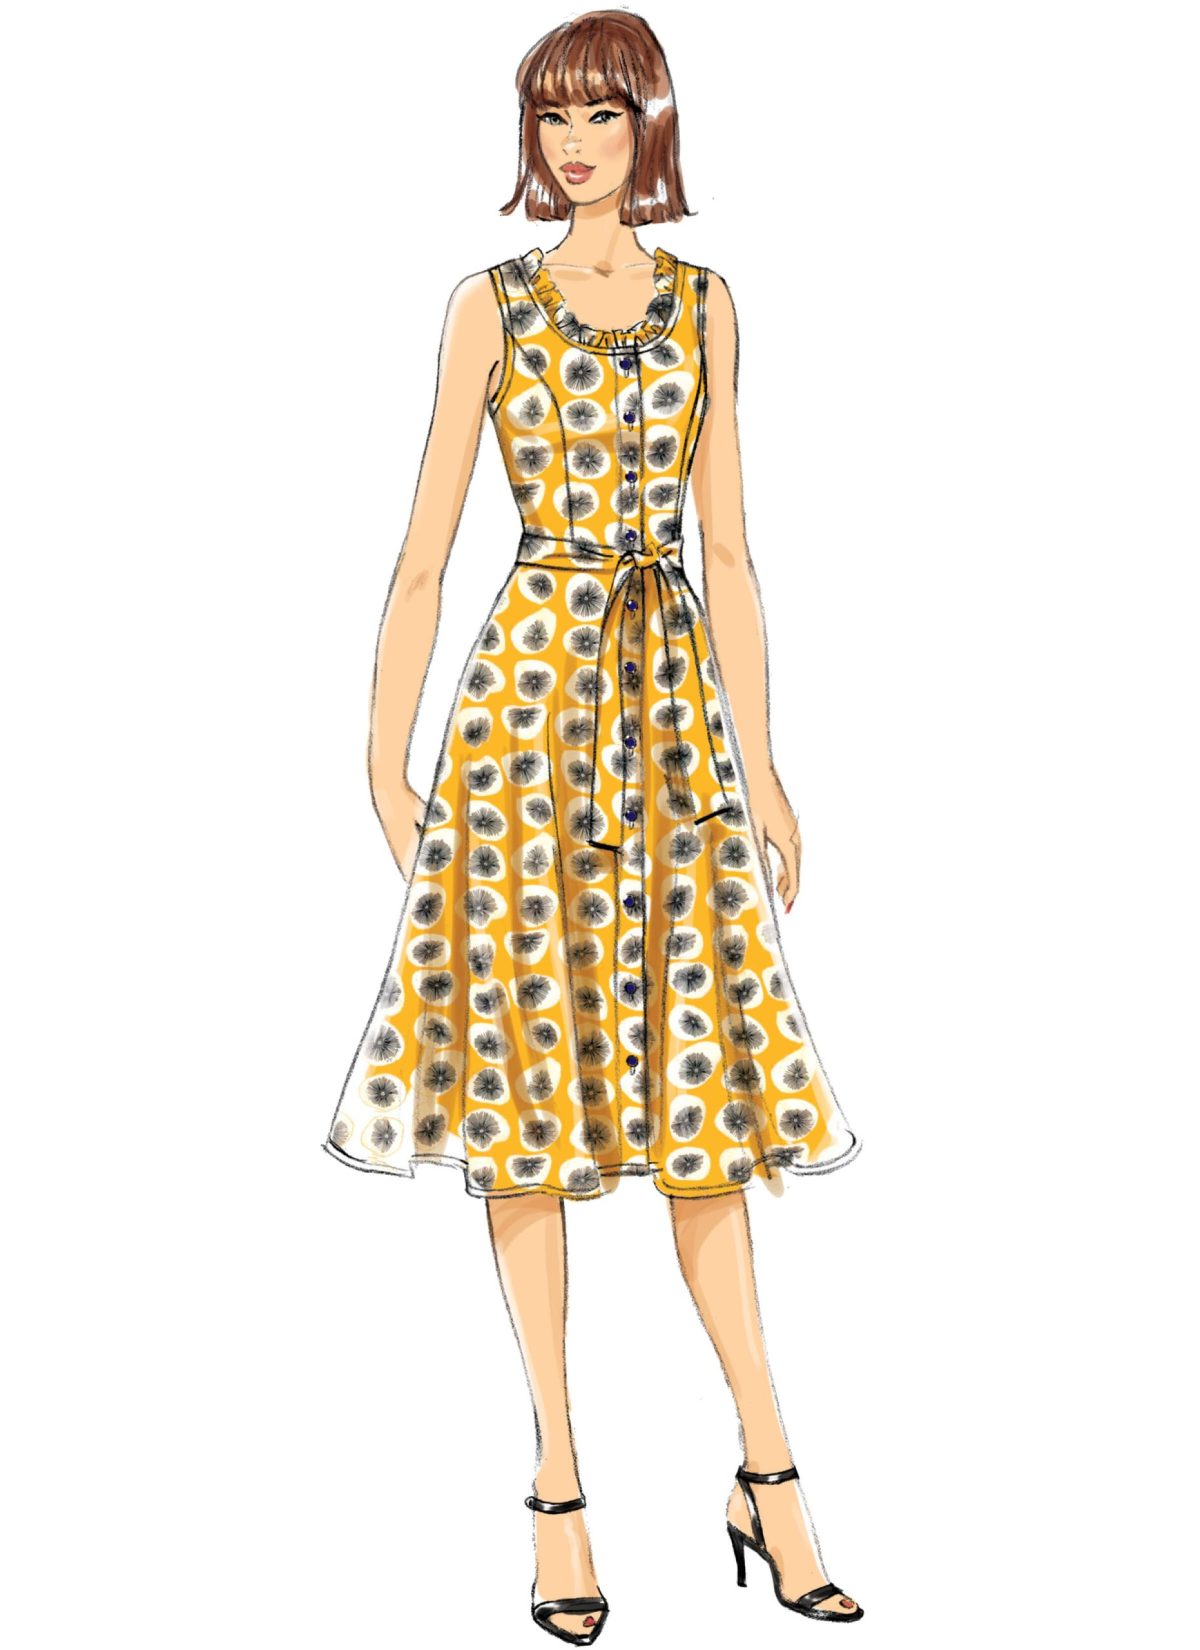 Butterick Sewing Pattern B6674 Misses' Dress, Sash and Bag